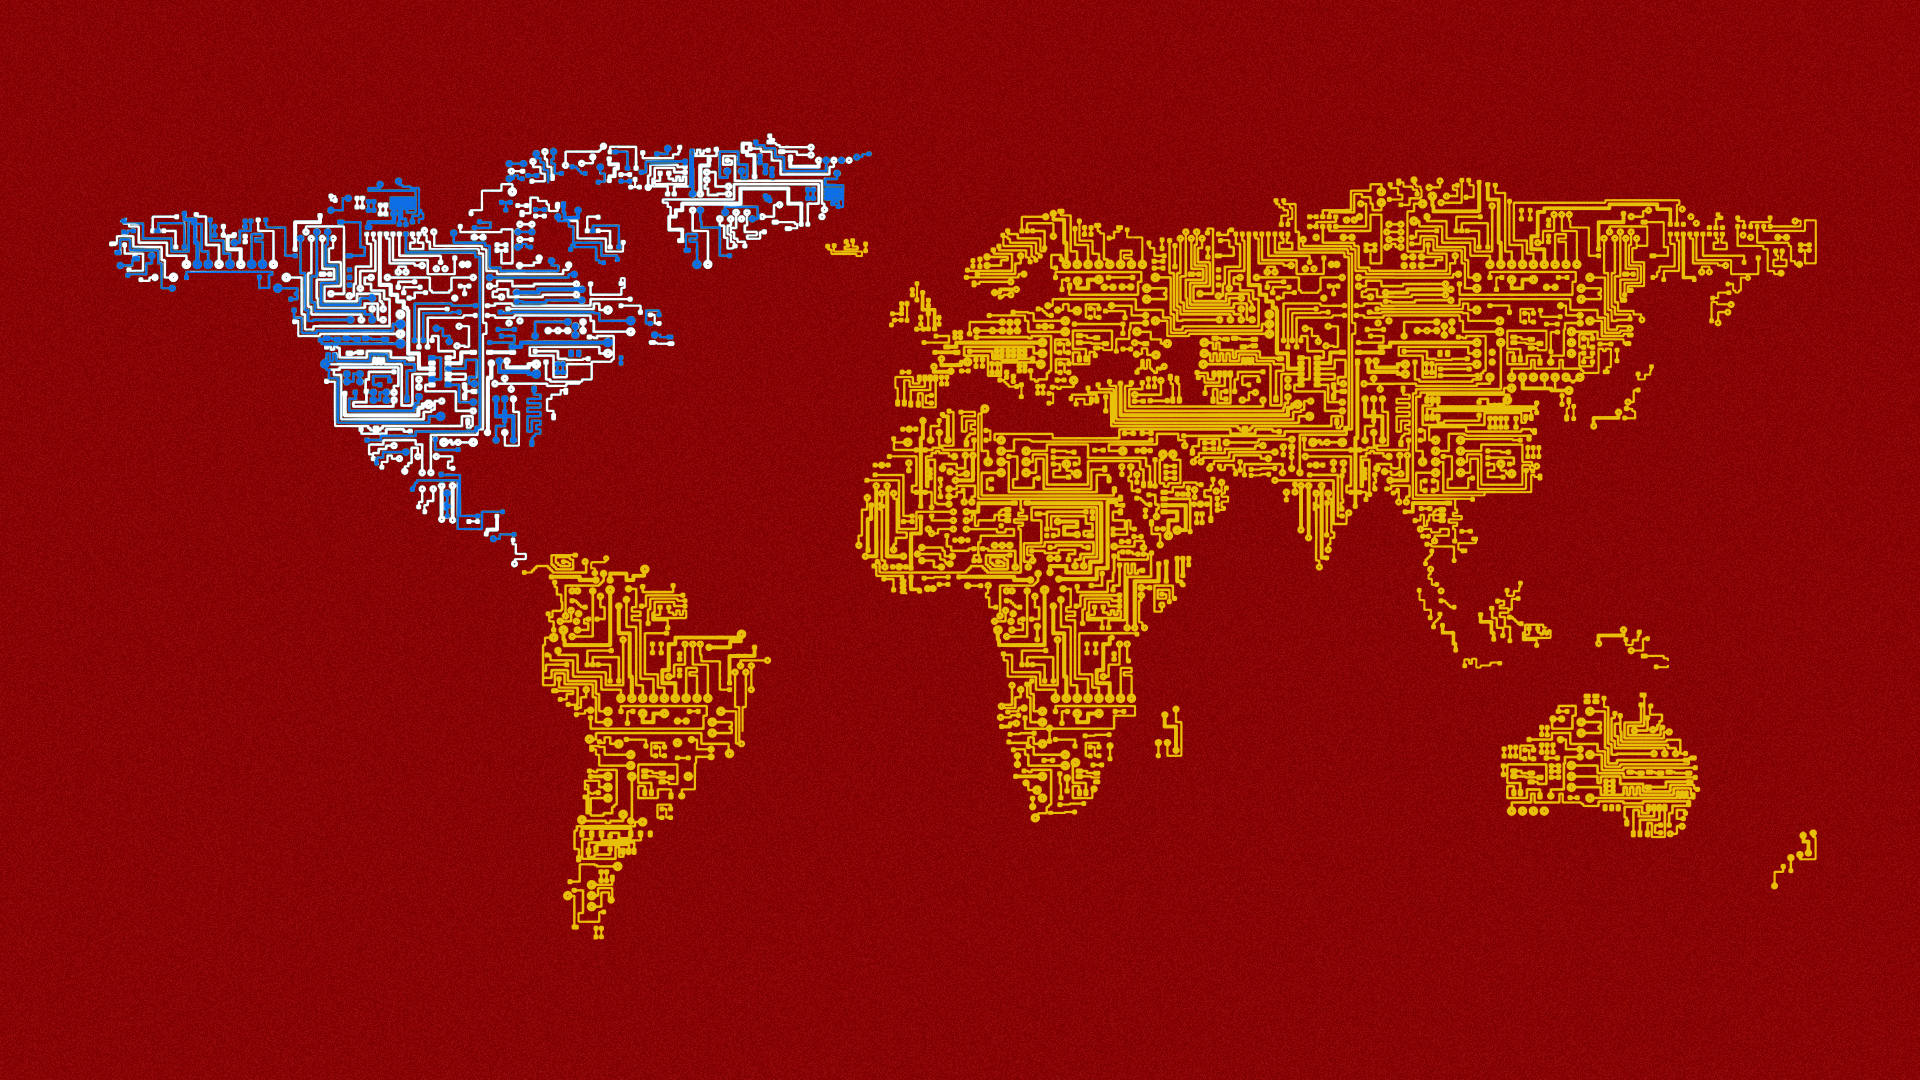 Illustration of the world as a circuitry map showing a Chinese presence in South America, Africa, Europe, Asia, and Australia, while only North America shows an American presence.